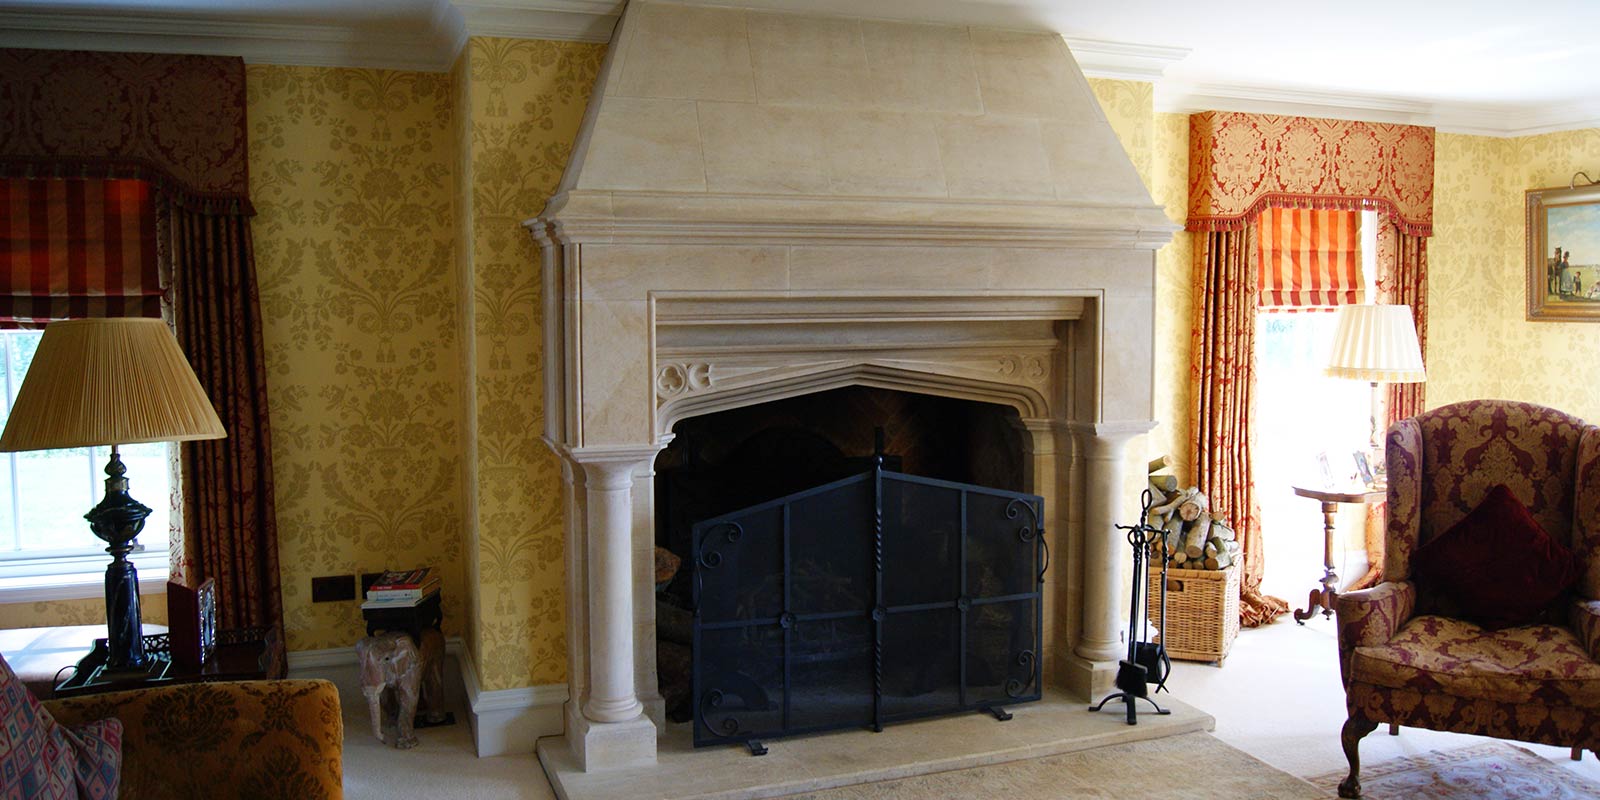 Specialist Stone Designs - High quality stonework and design services